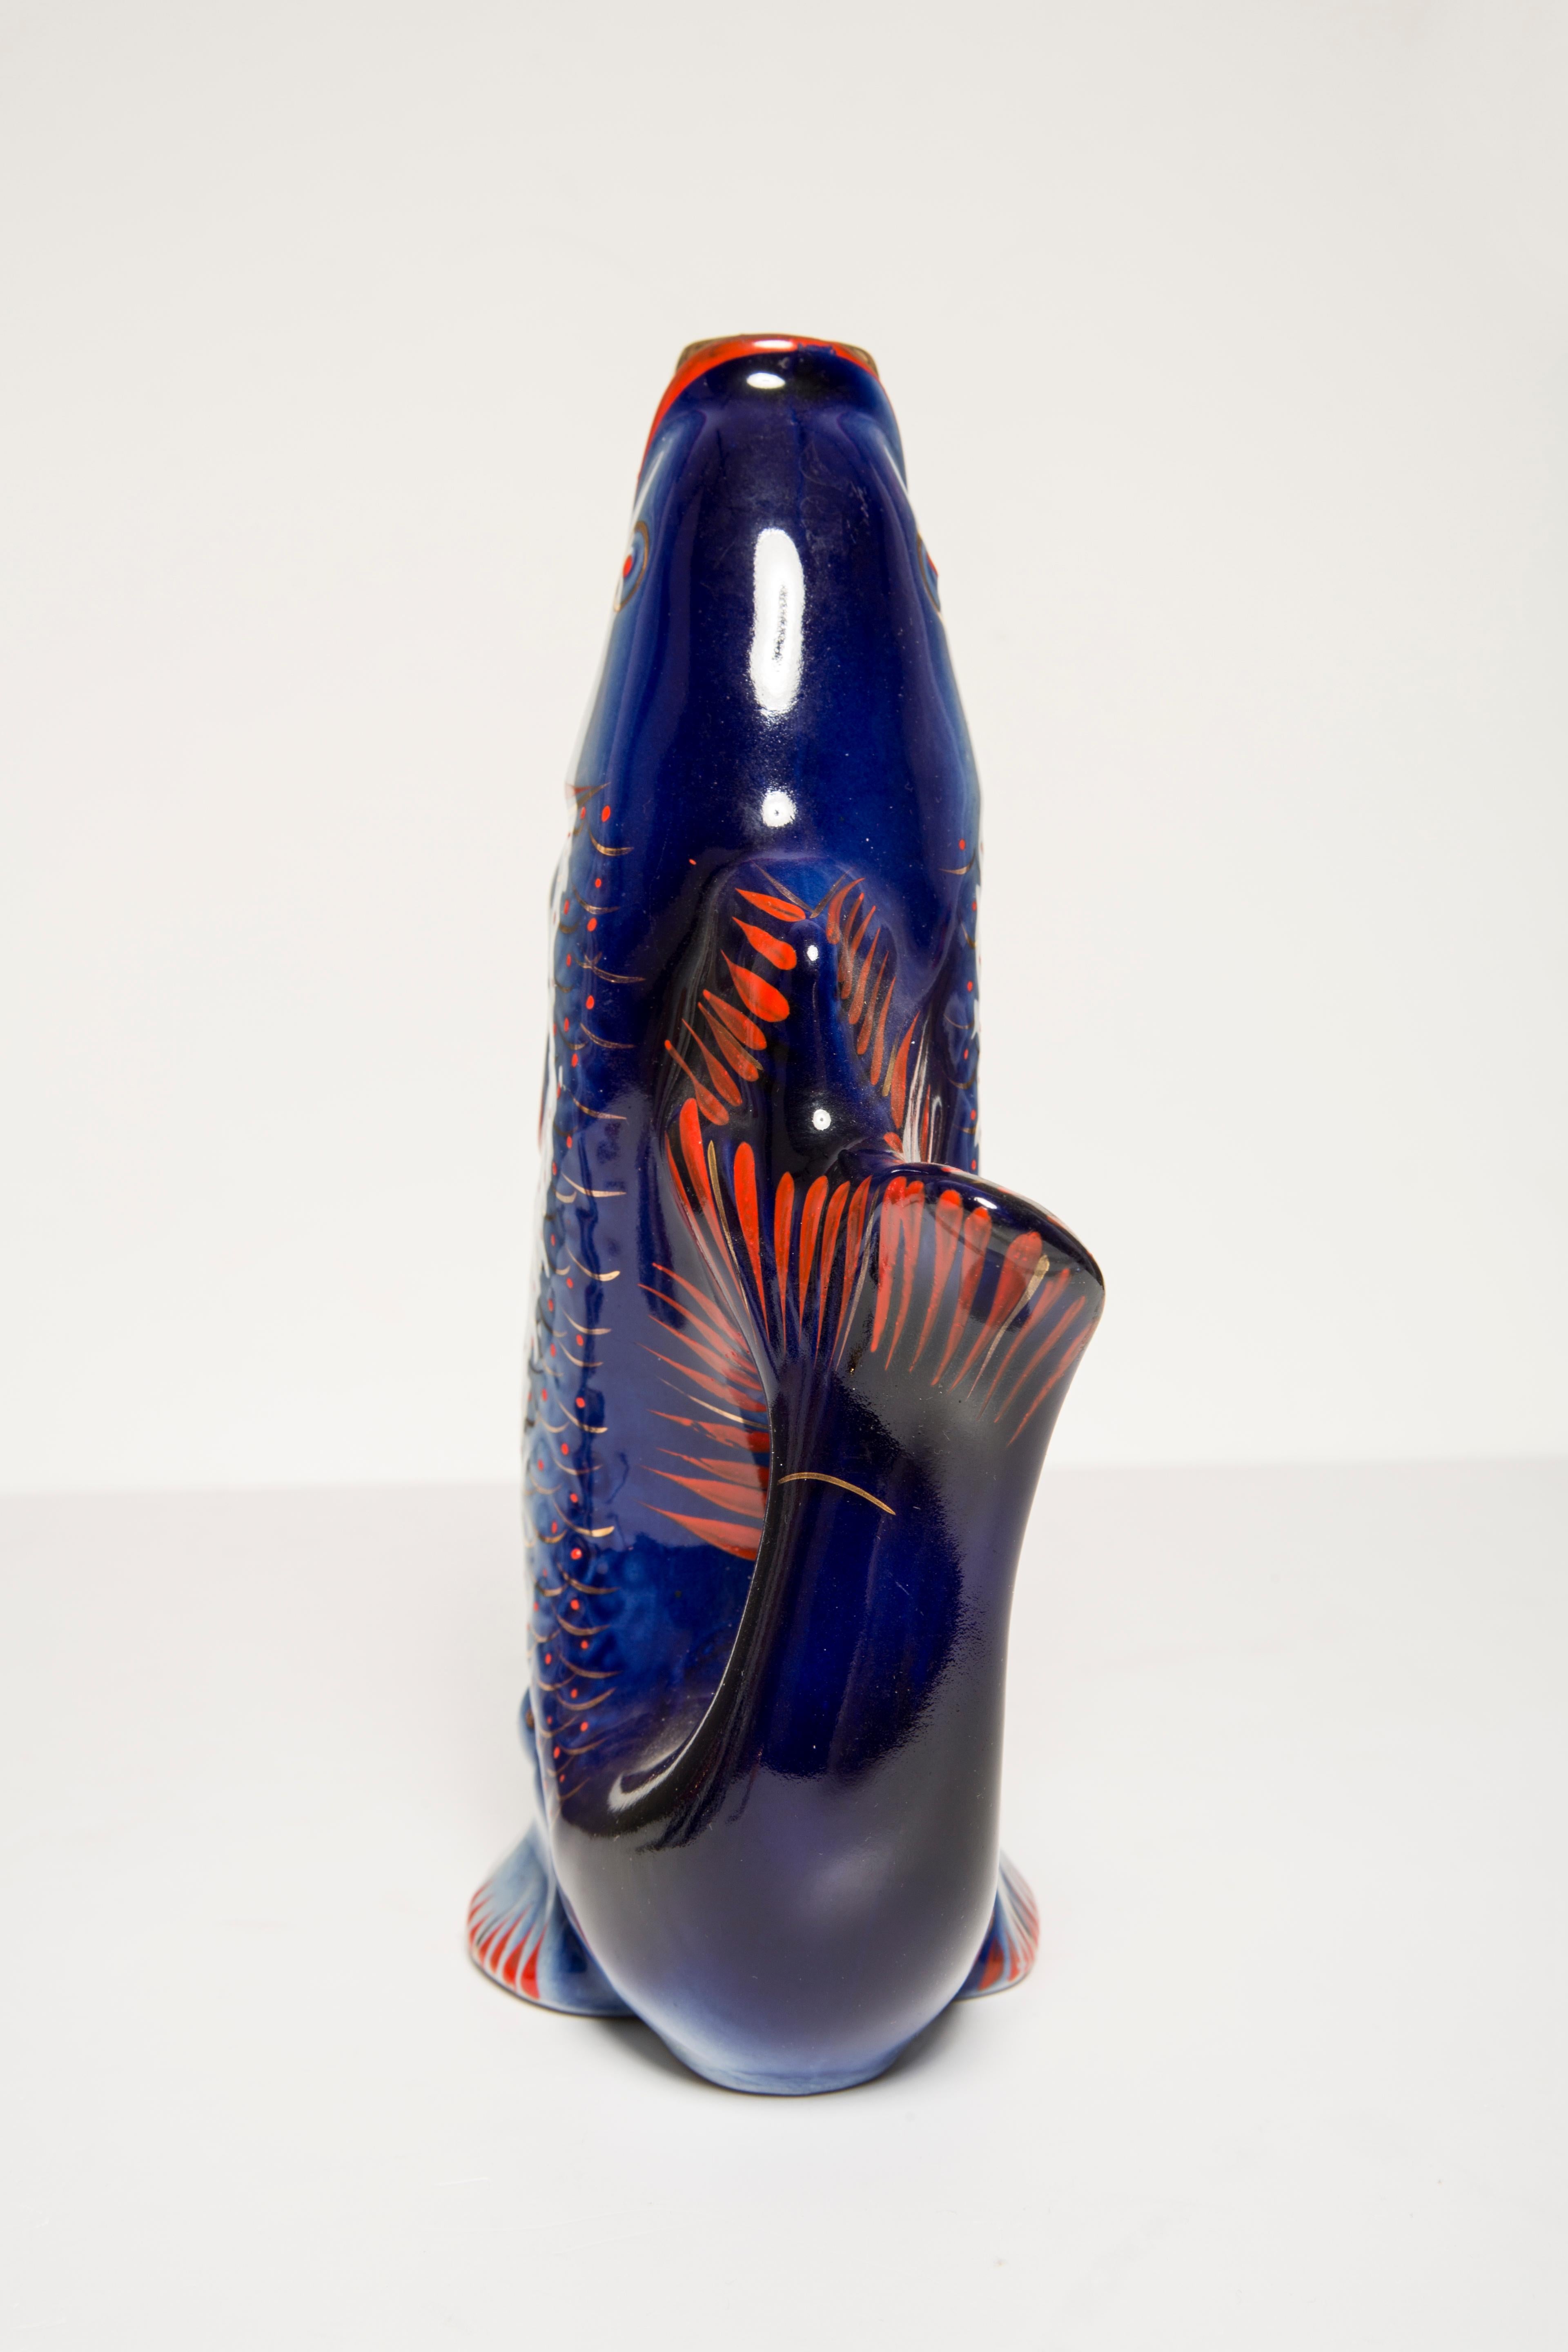 Blue Fish Glass Decanter and Glasses, 20th Century, Europe, 1960s For Sale 11